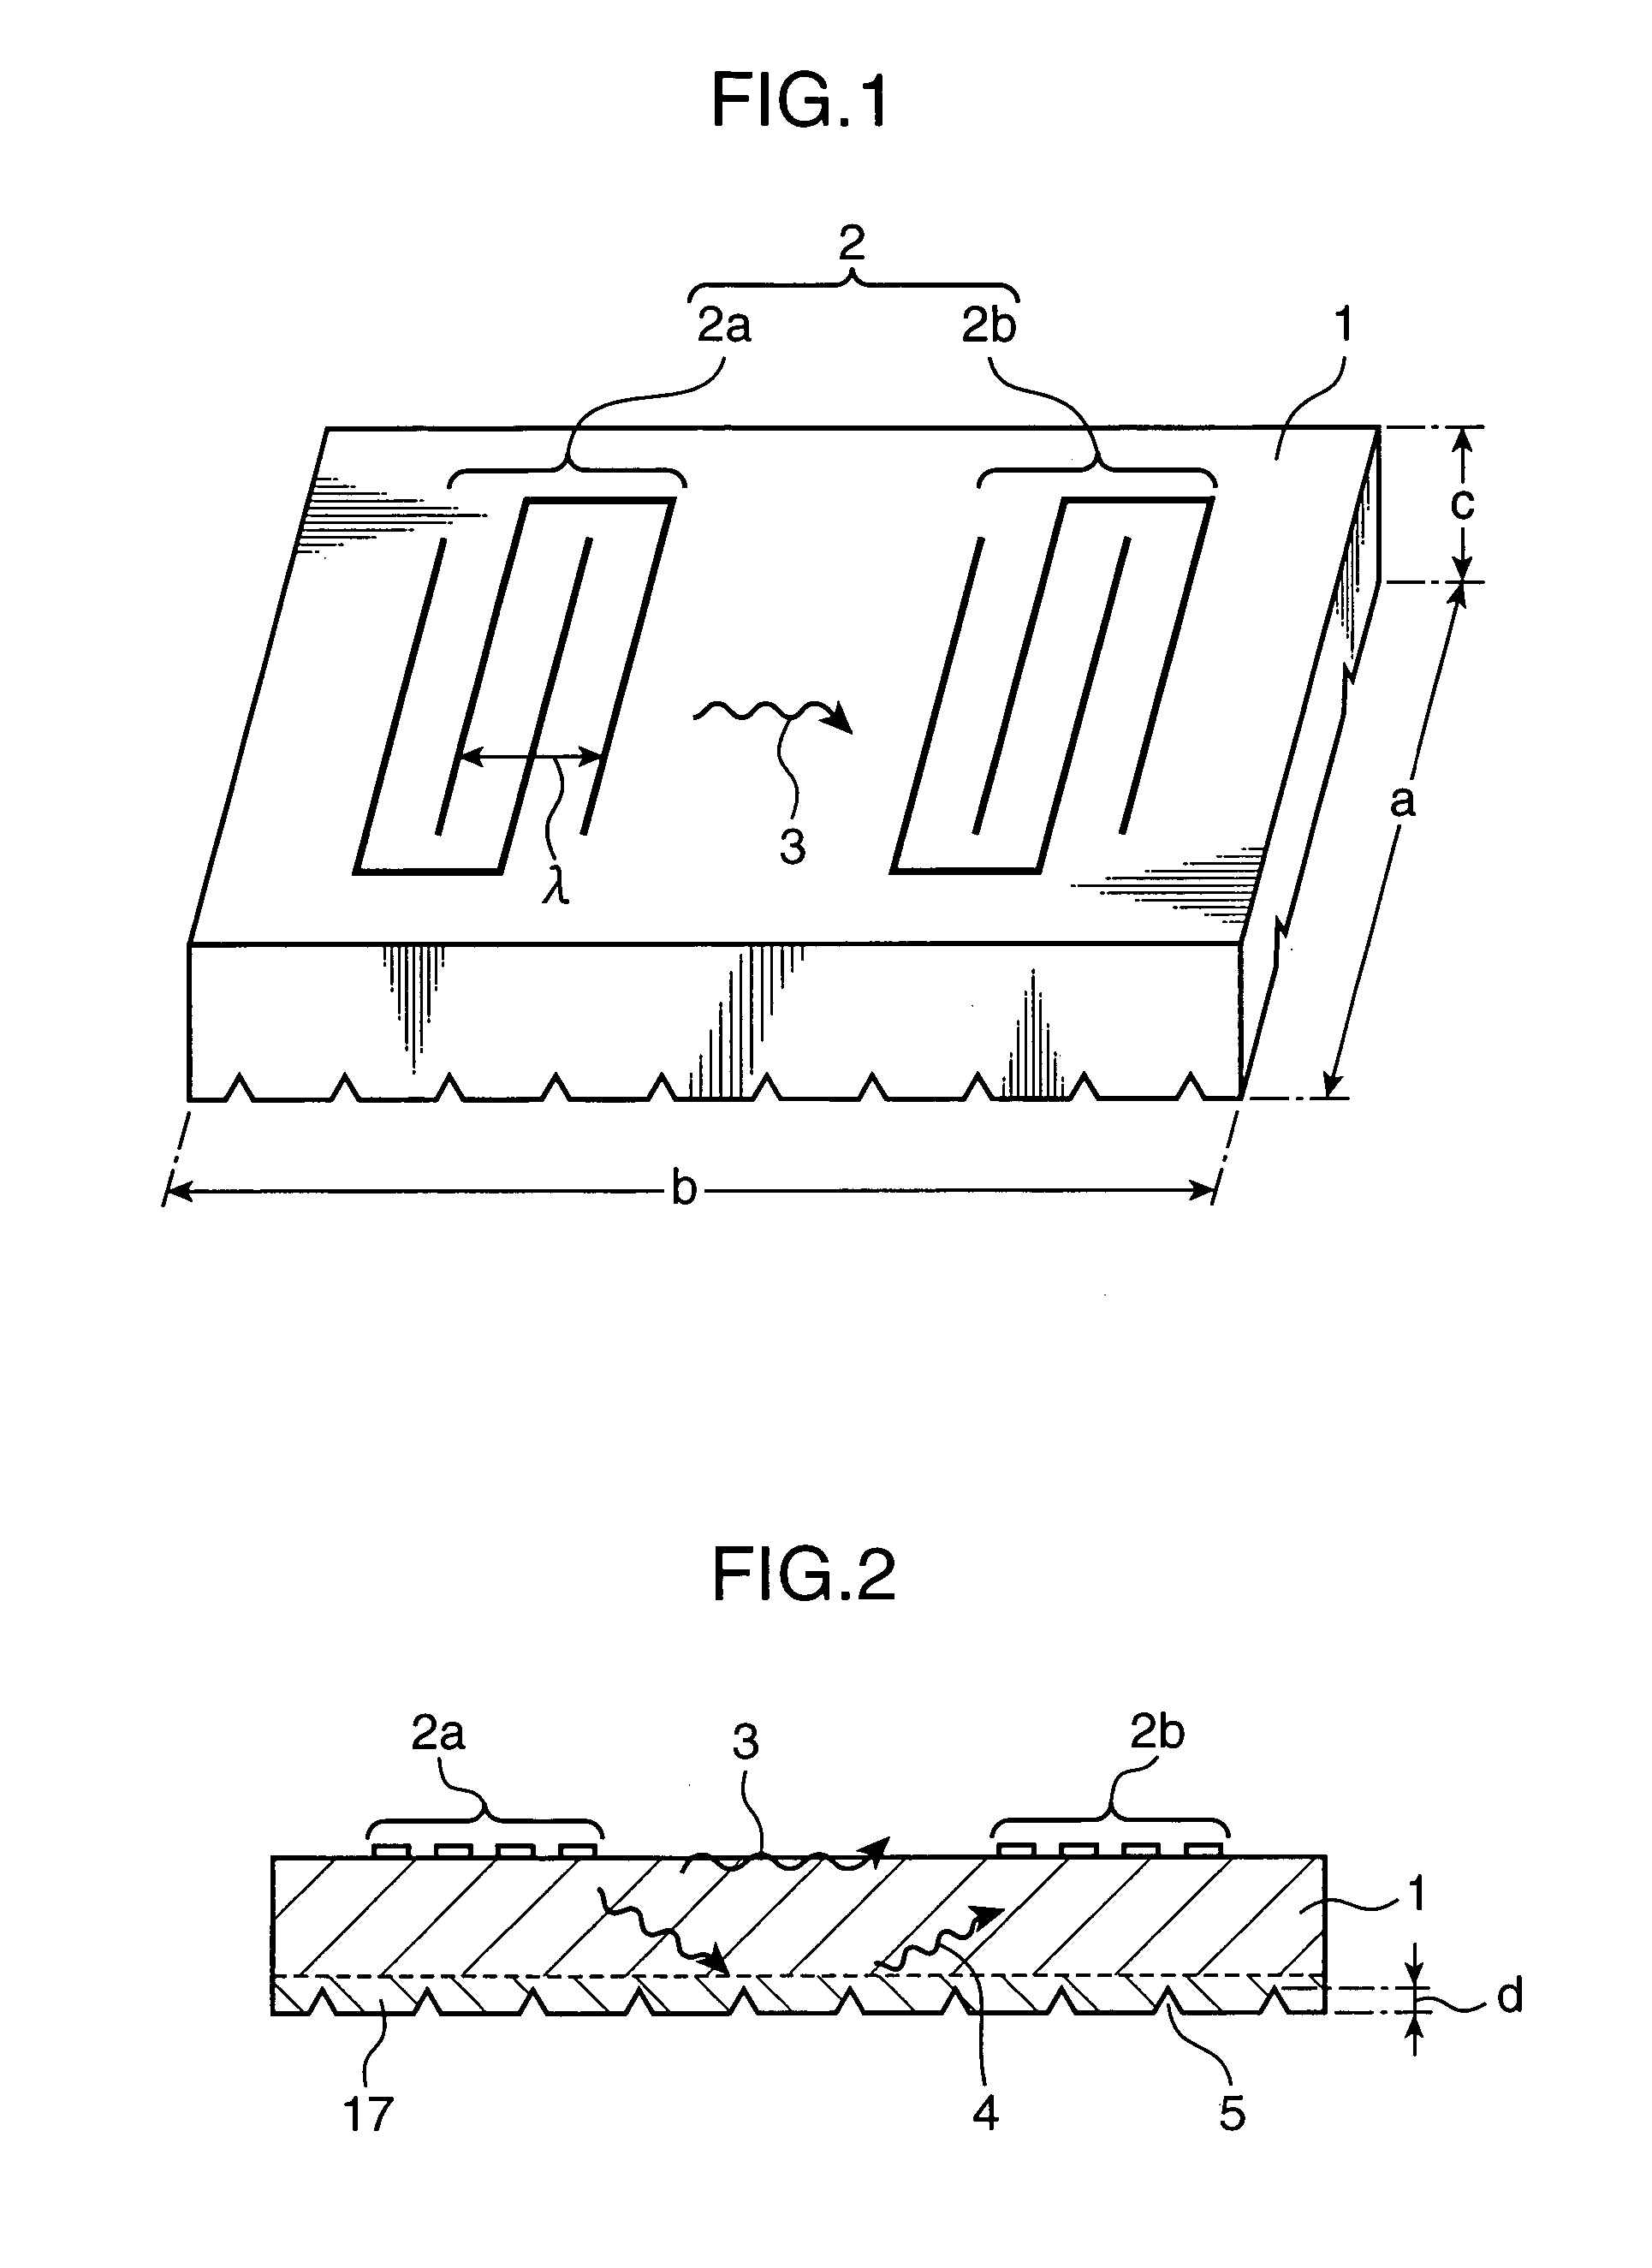 Surface acoustic wave device and process for fabricating the same